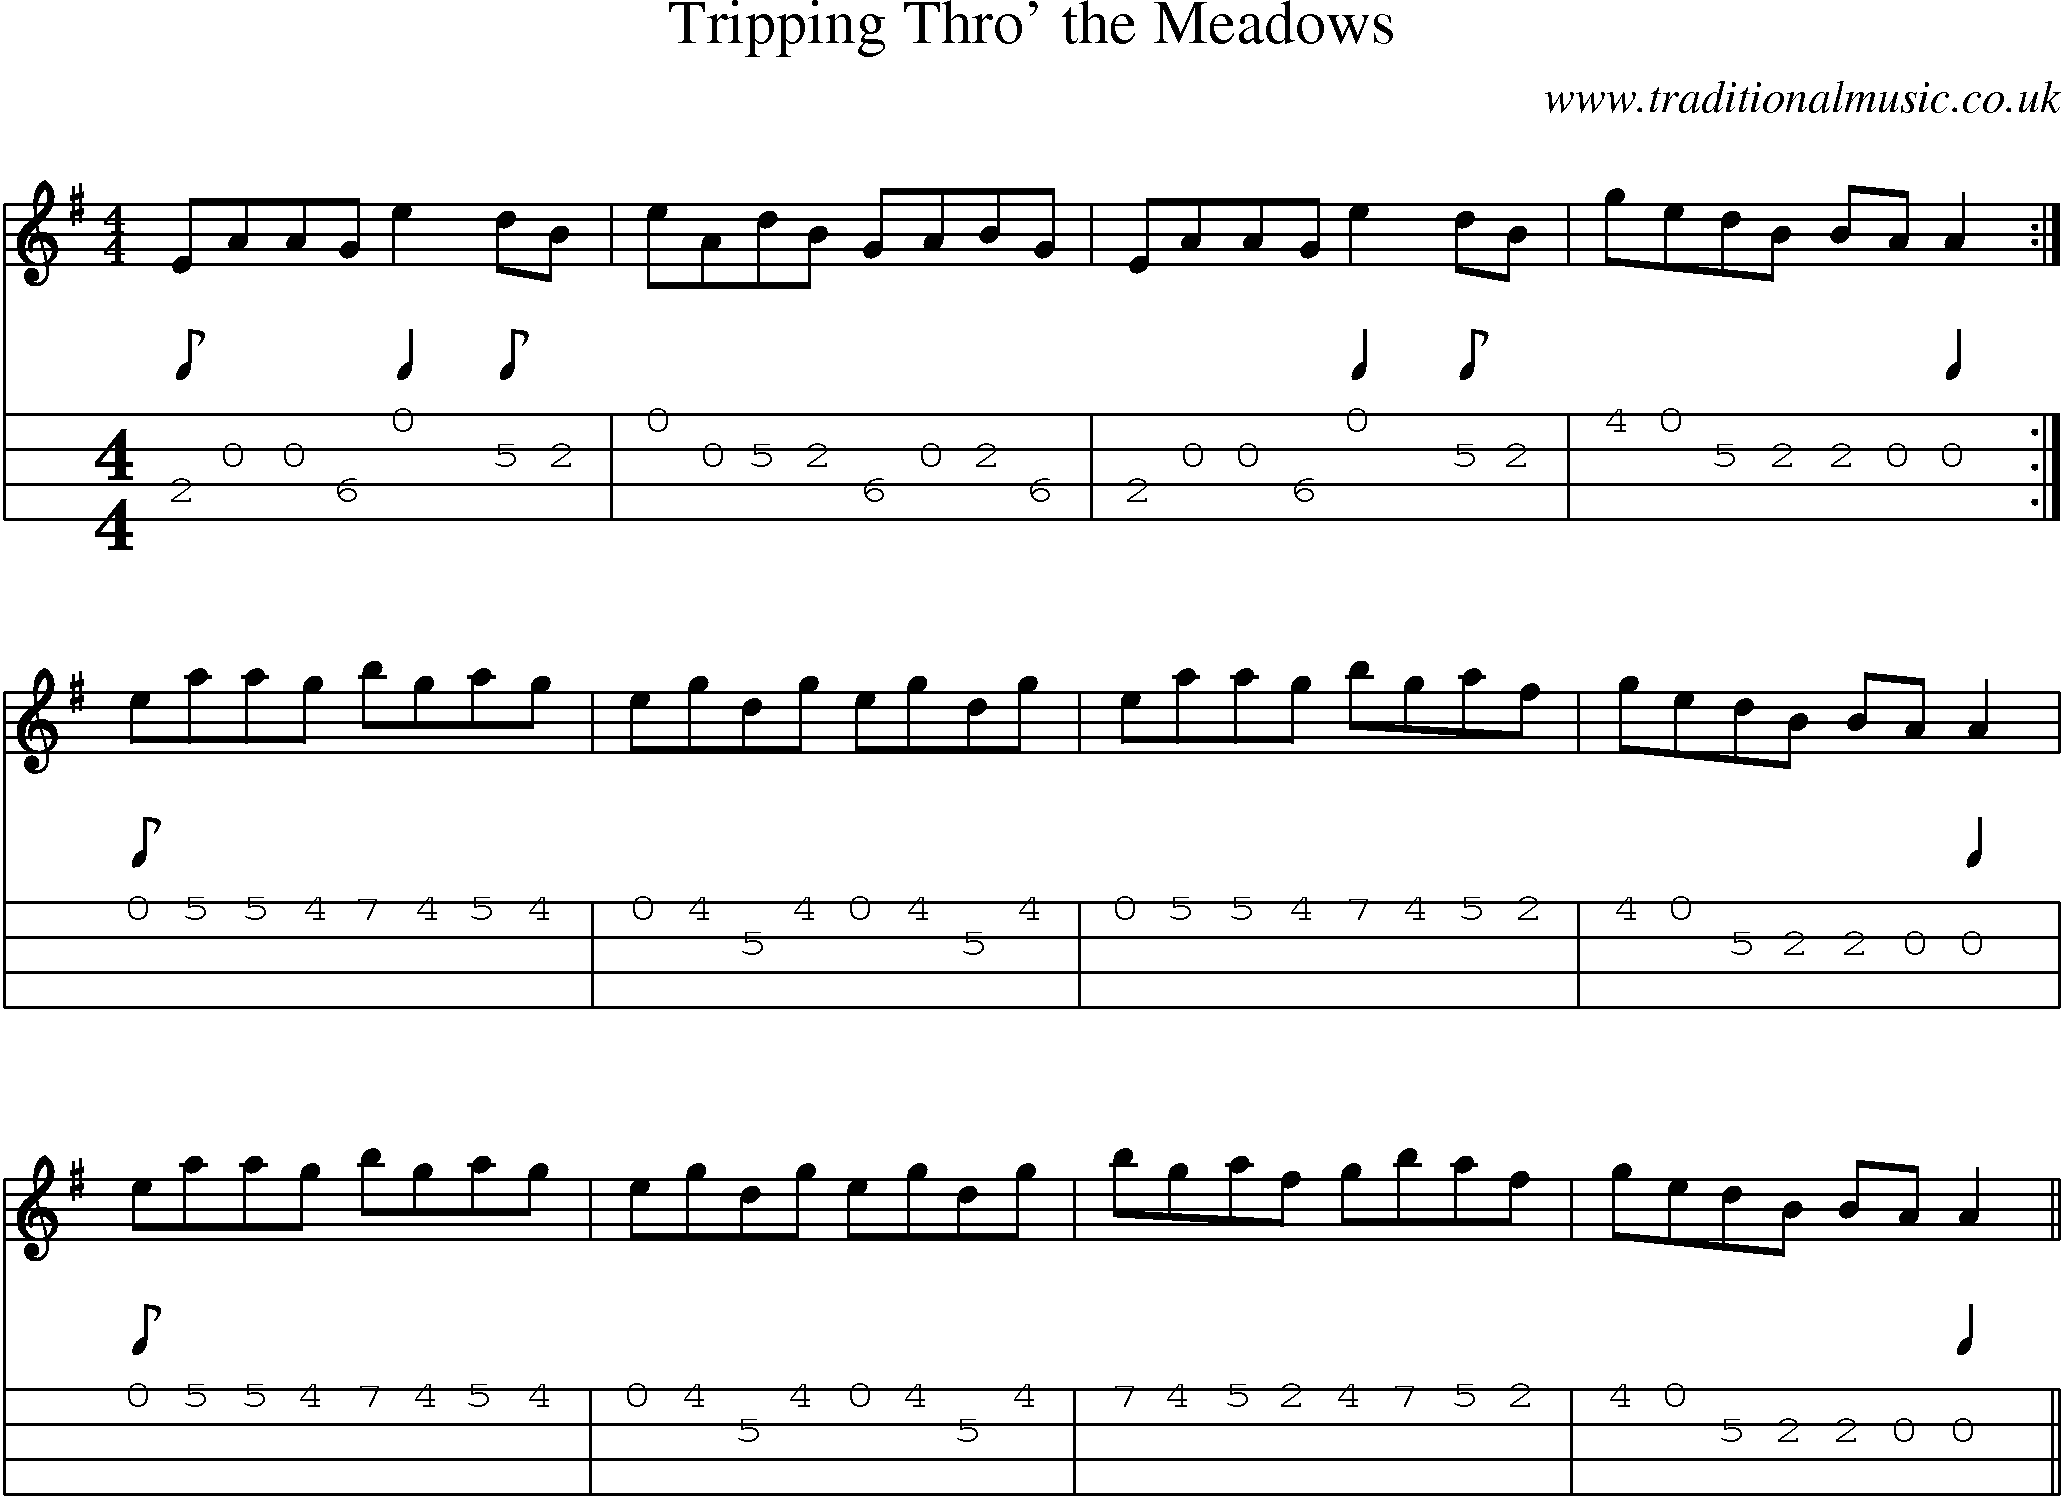 Music Score and Mandolin Tabs for Tripping Thro Meadows